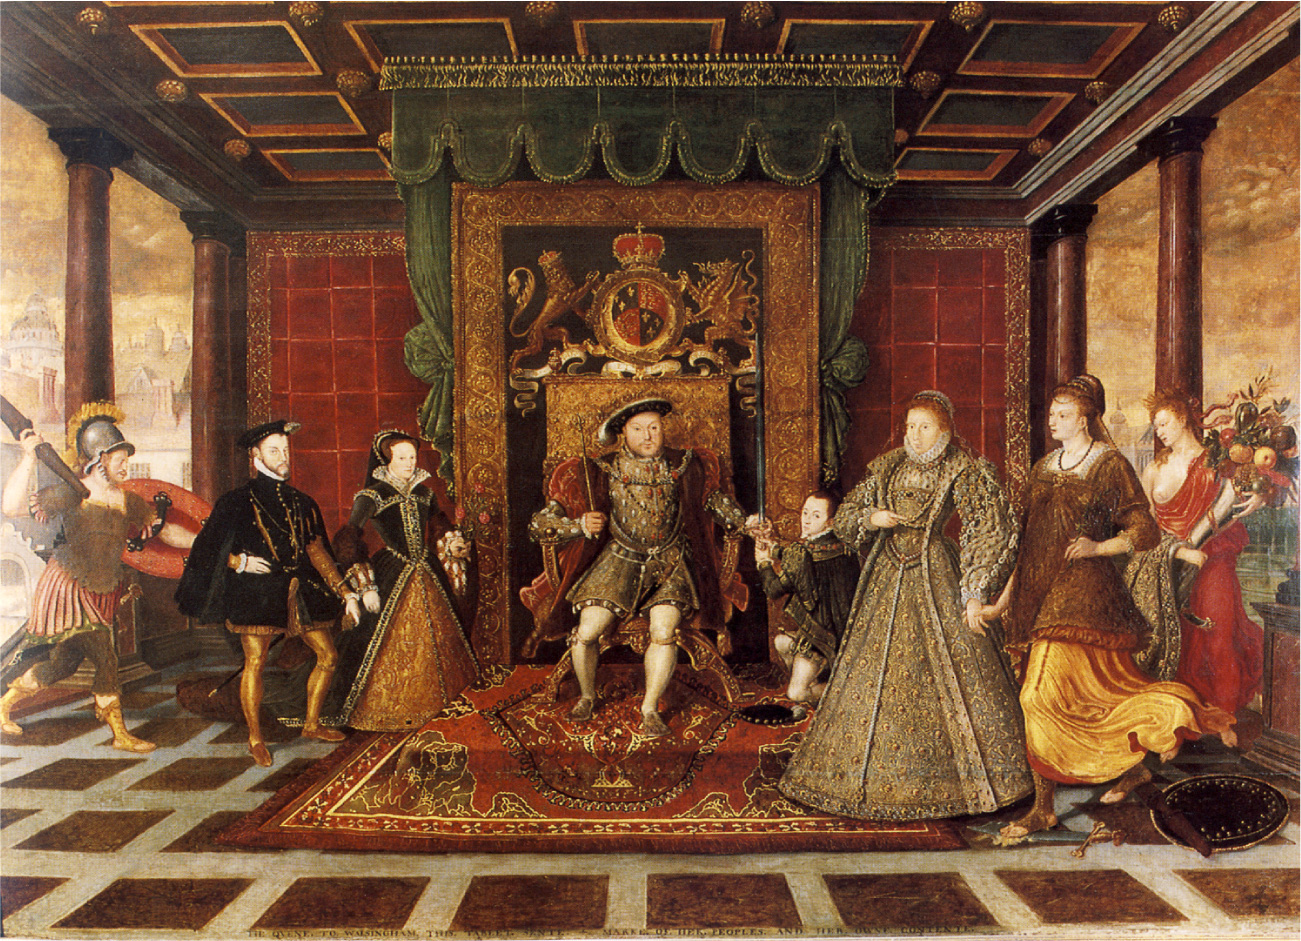 In this painting a man sits on an ornate gold throne with a crest and green canopy above, a highly decorated wall behind, and detailed rugs below. He is wearing white stockings, red robes and a hat with a feather. With his right hand, the man holds a scepter up. With his left hand, the man hands a little boy dressed in white stockings and green robes a sword. Next to the boy stand two women in very elaborate long gowns, holding hands. Behind them is a lady in a red plain cloth holding a bouquet of flowers. A man and woman stand on the left side of the painting. They are dressed in elaborate, dark coats, gowns, and hats. Behind them a man in military armor and a helmet holds a shield with one hand and an upraised large stick in his other hand and runs toward the pair. A city can be seen in the far background.